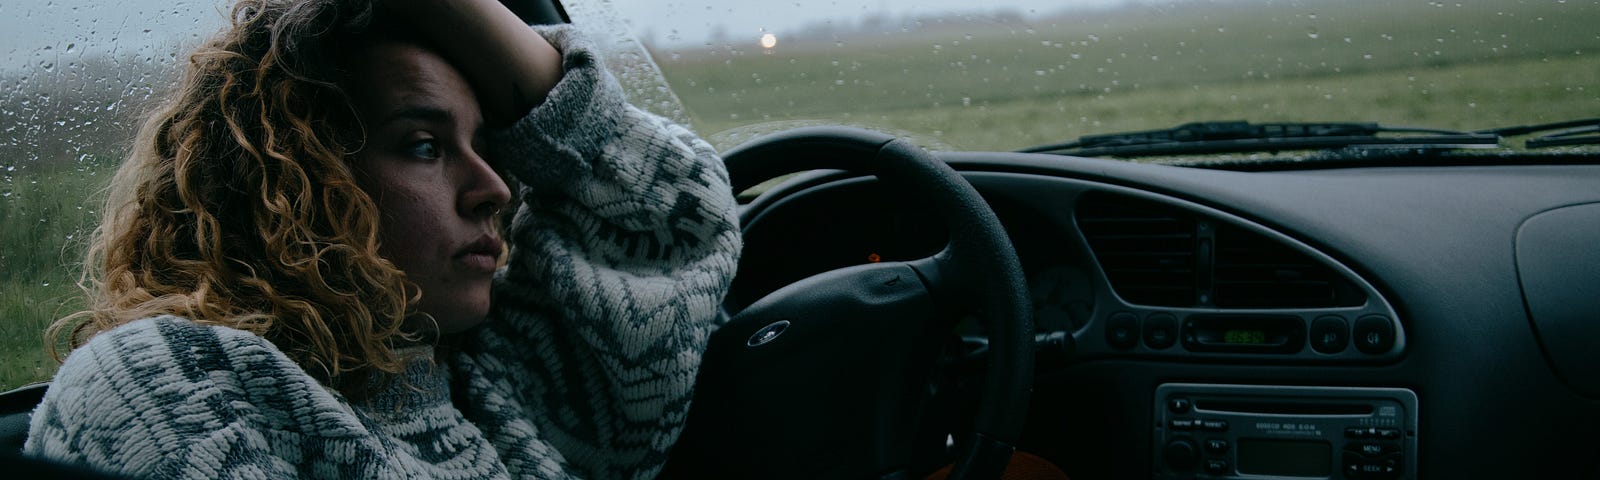 A woman sitting in her car, looking depressed on a dark and rainy day.